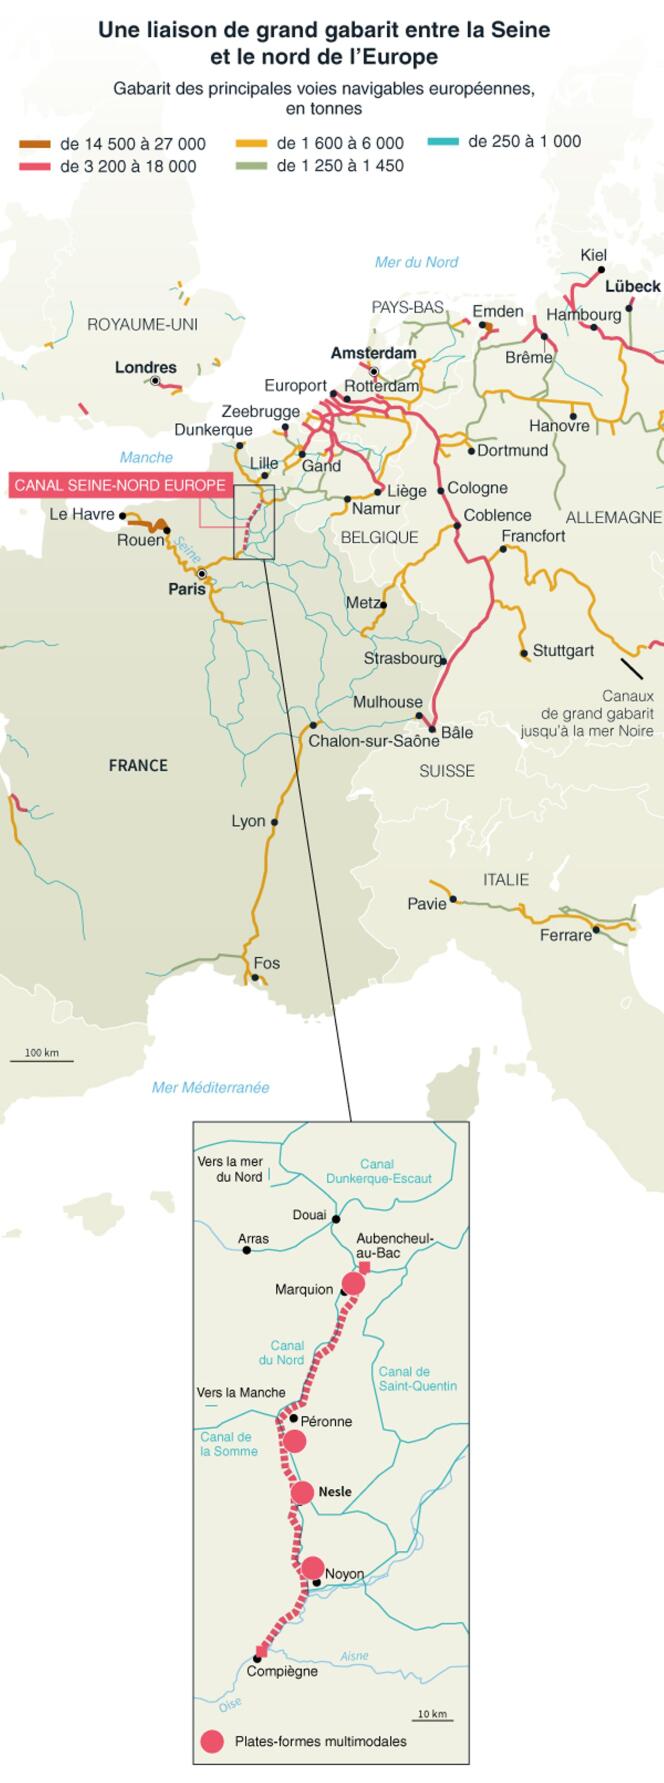 Le canal Seine-Nord Europe